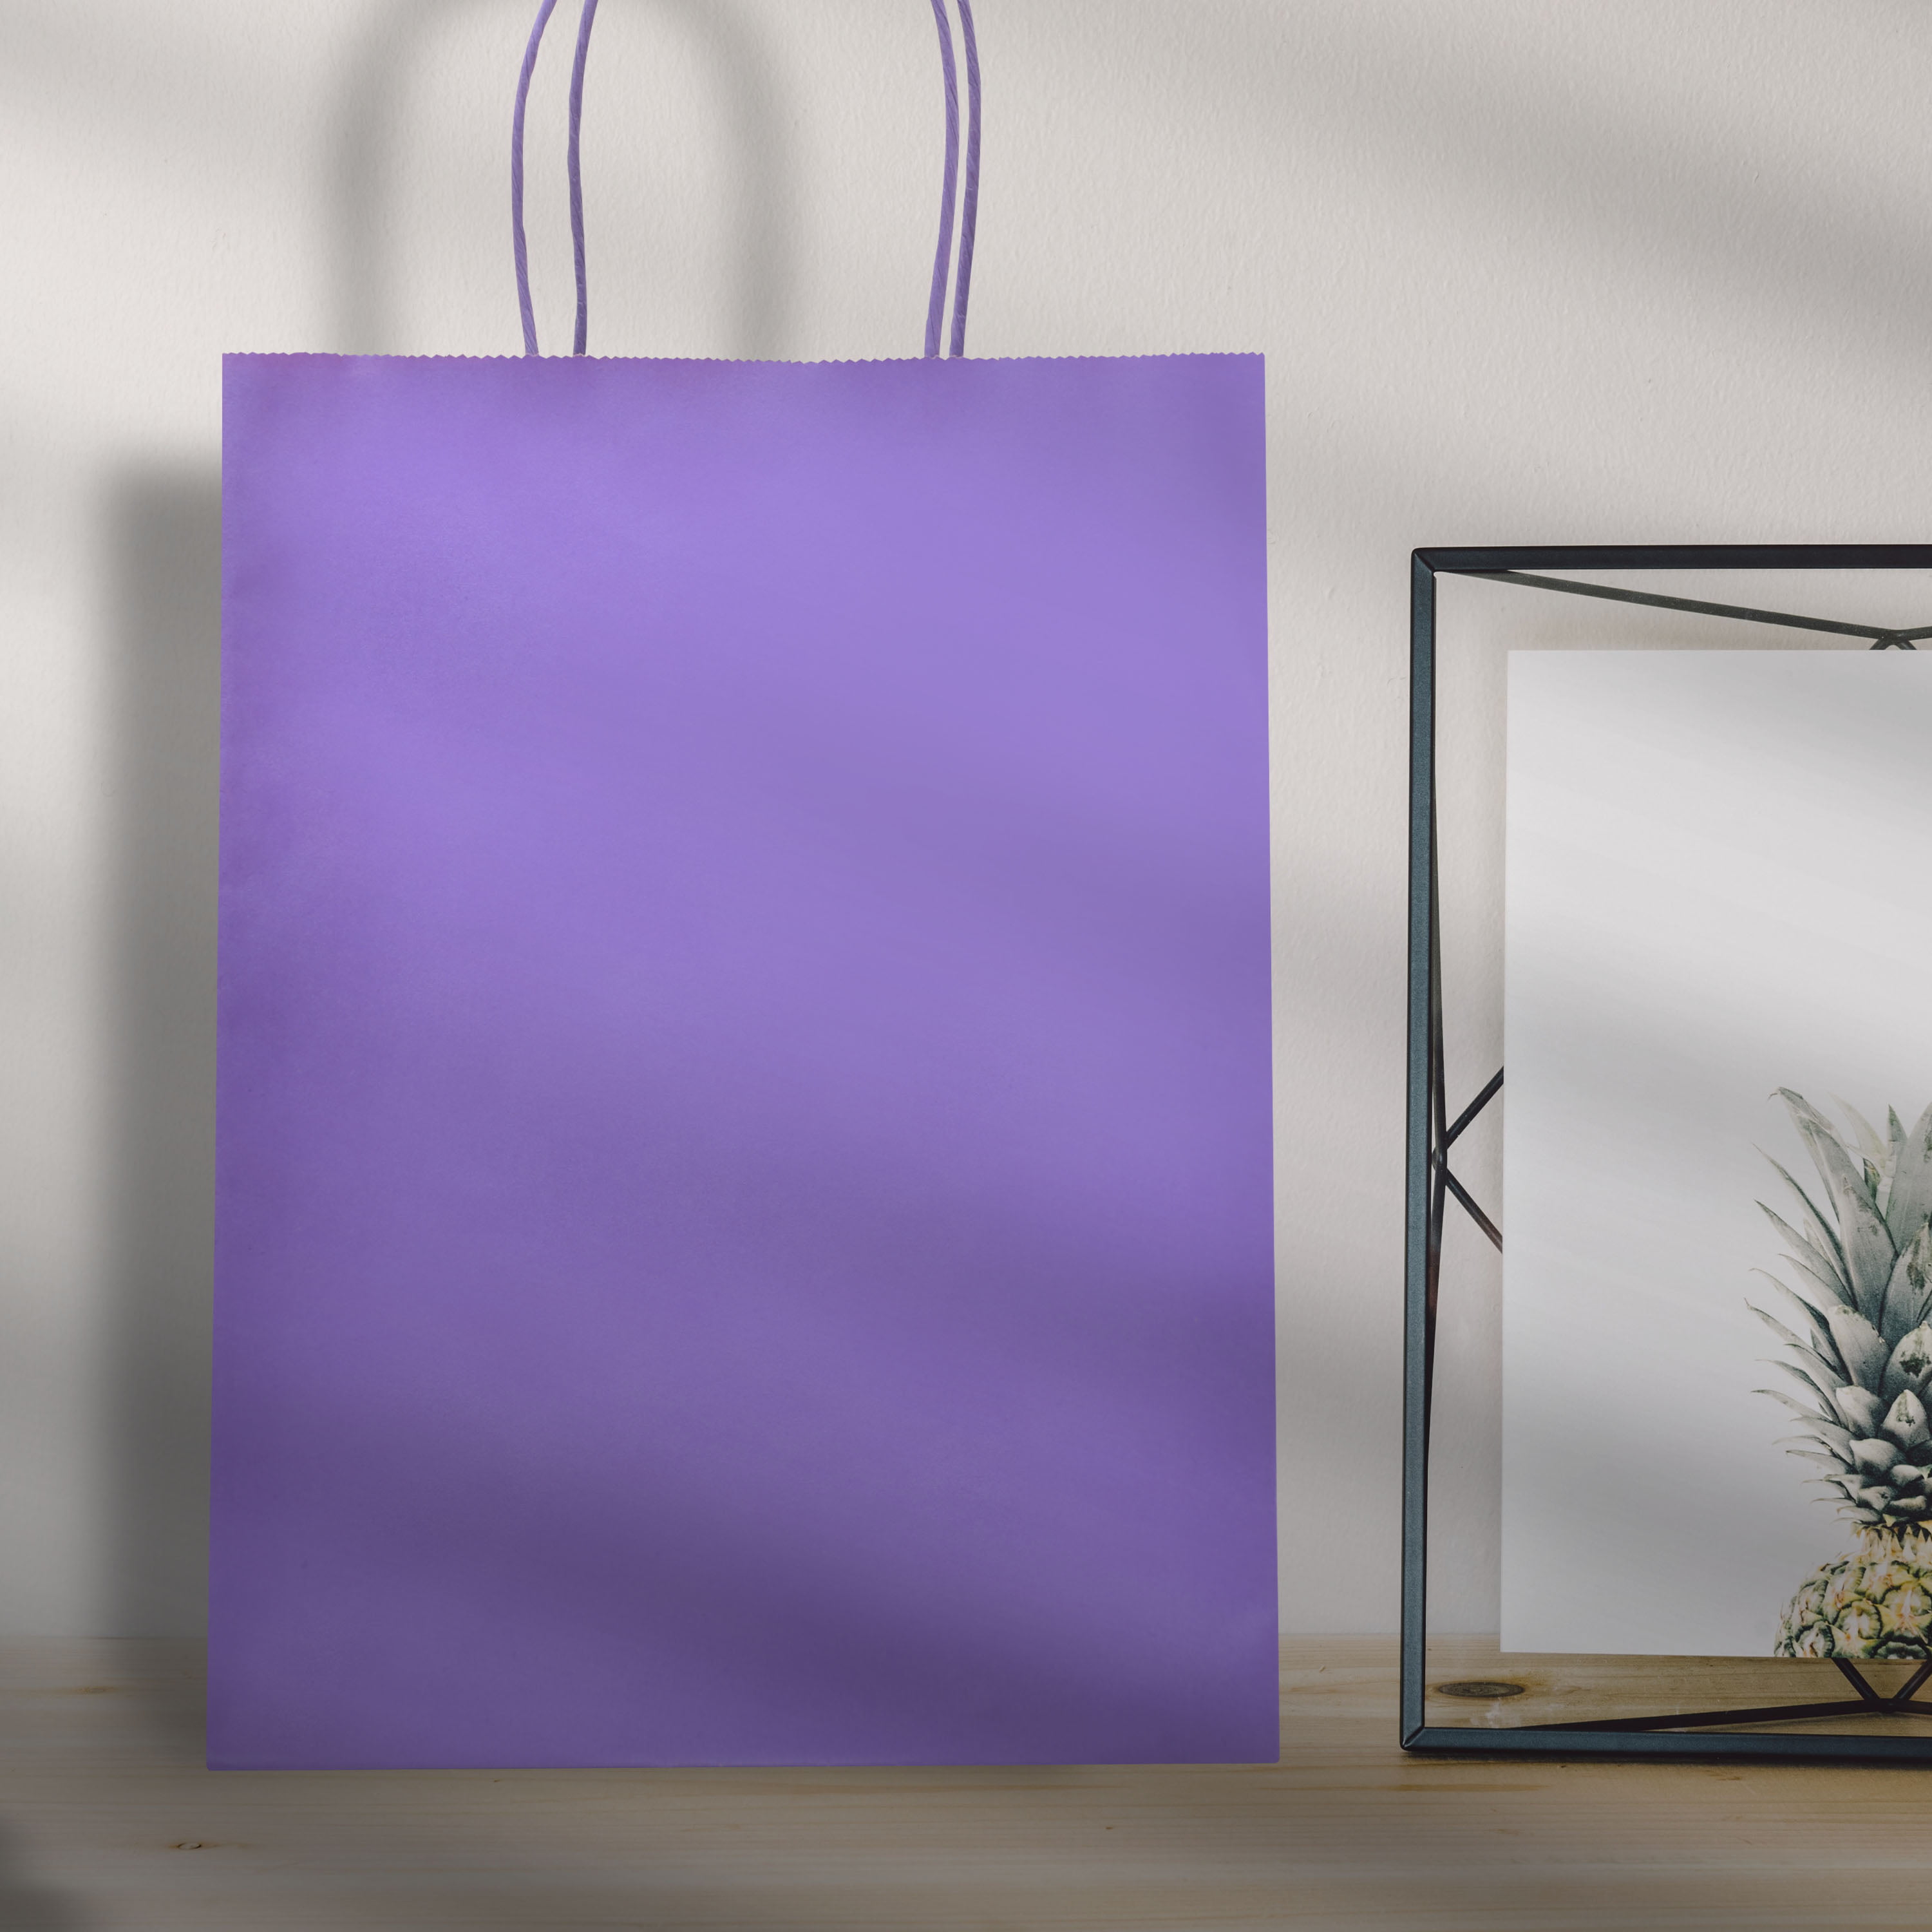 Purple Gift Bag stock image. Image of paper, carry, gift - 7325